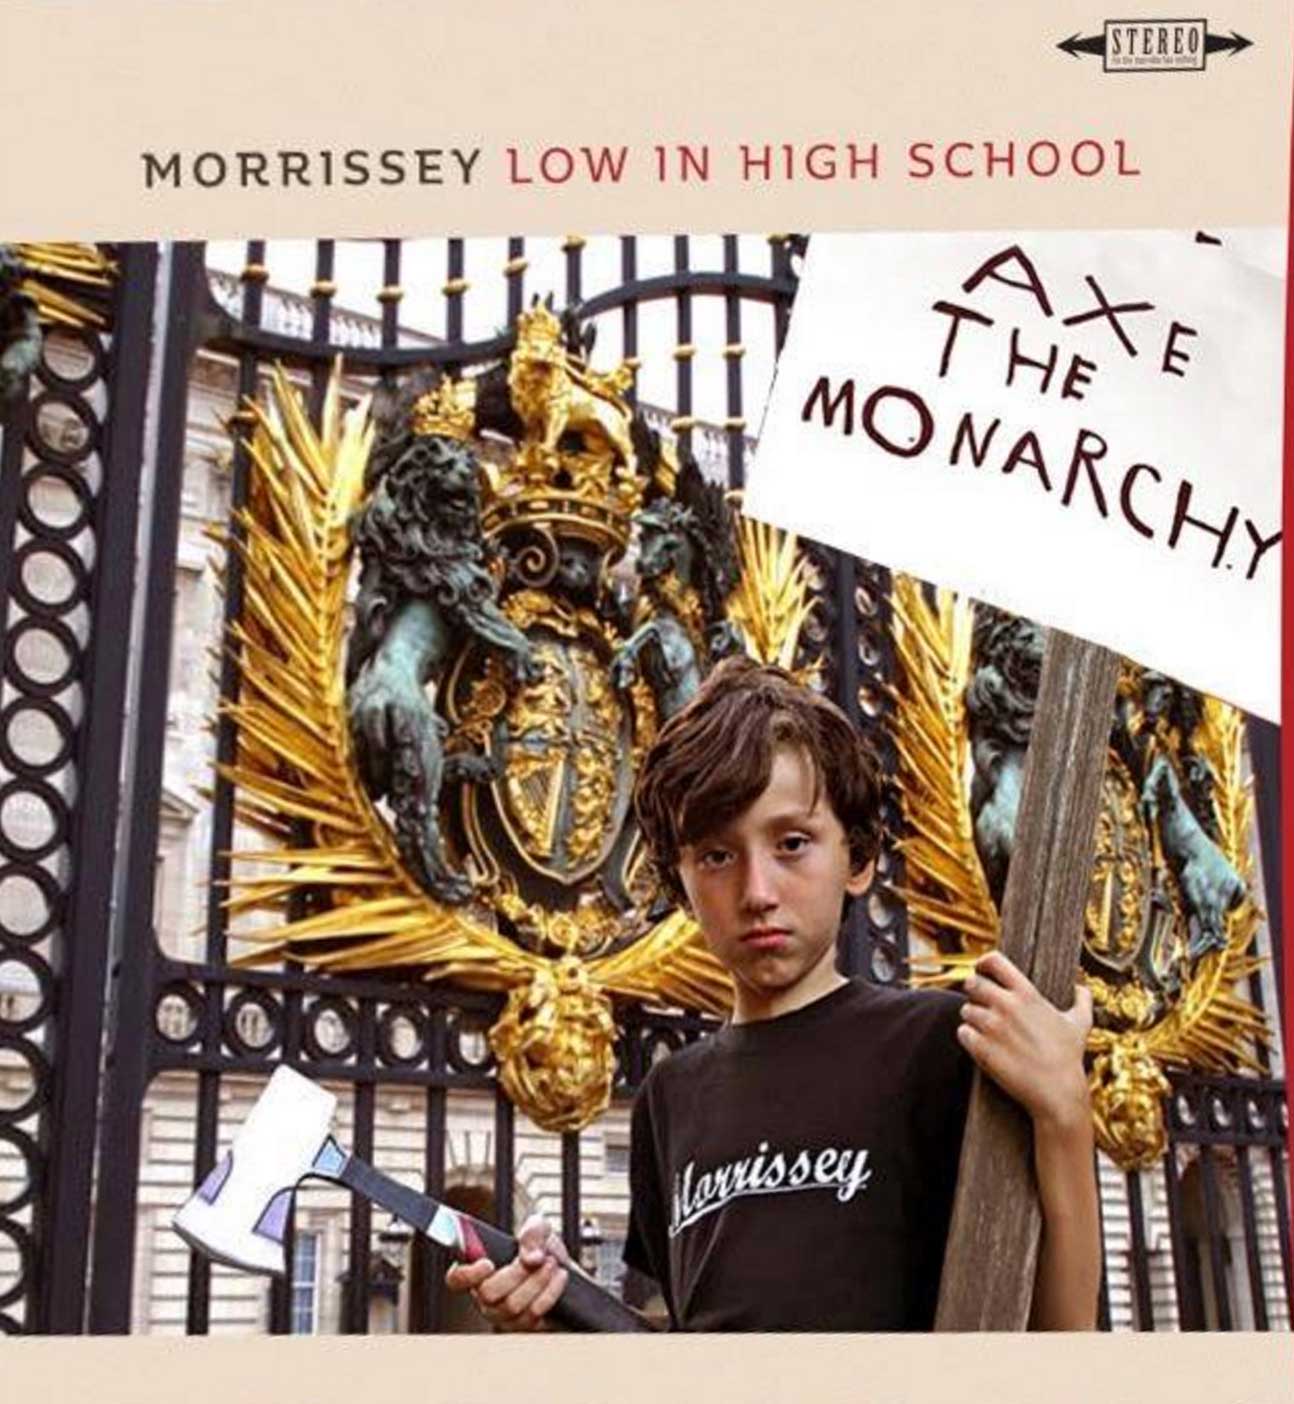 Morrissey - Página 6 Morrissey-low-in-high-school-cover-axe-the-monarchy